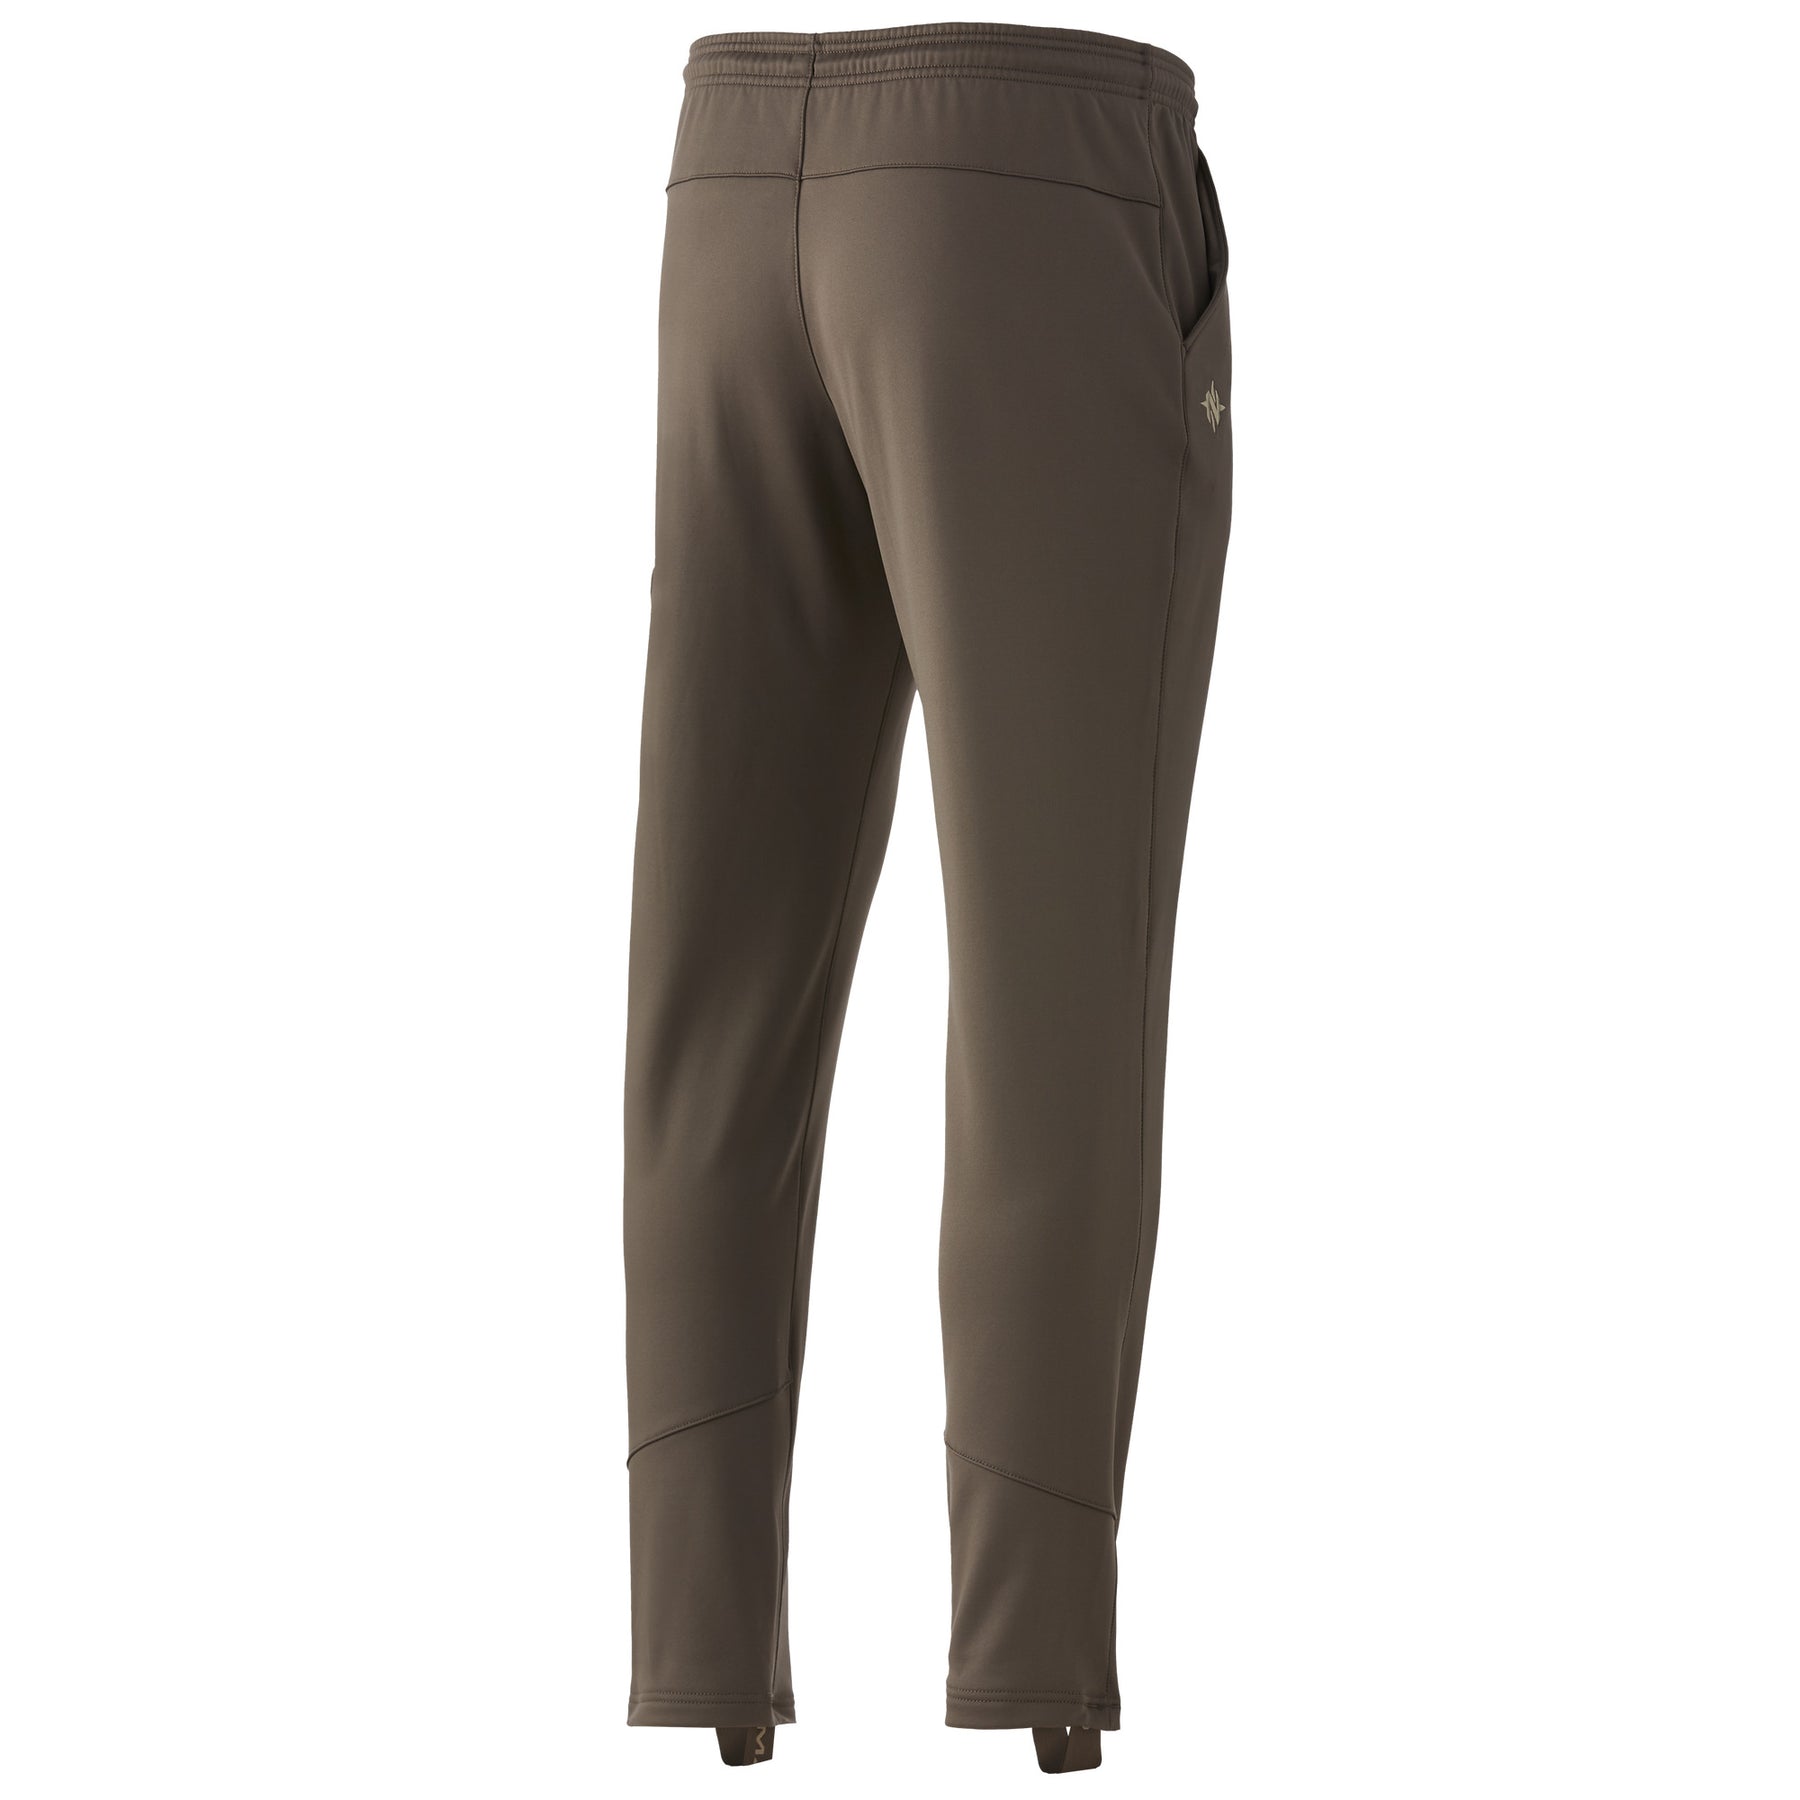 Nomad Utility Wader Pant – NOMAD Outdoor